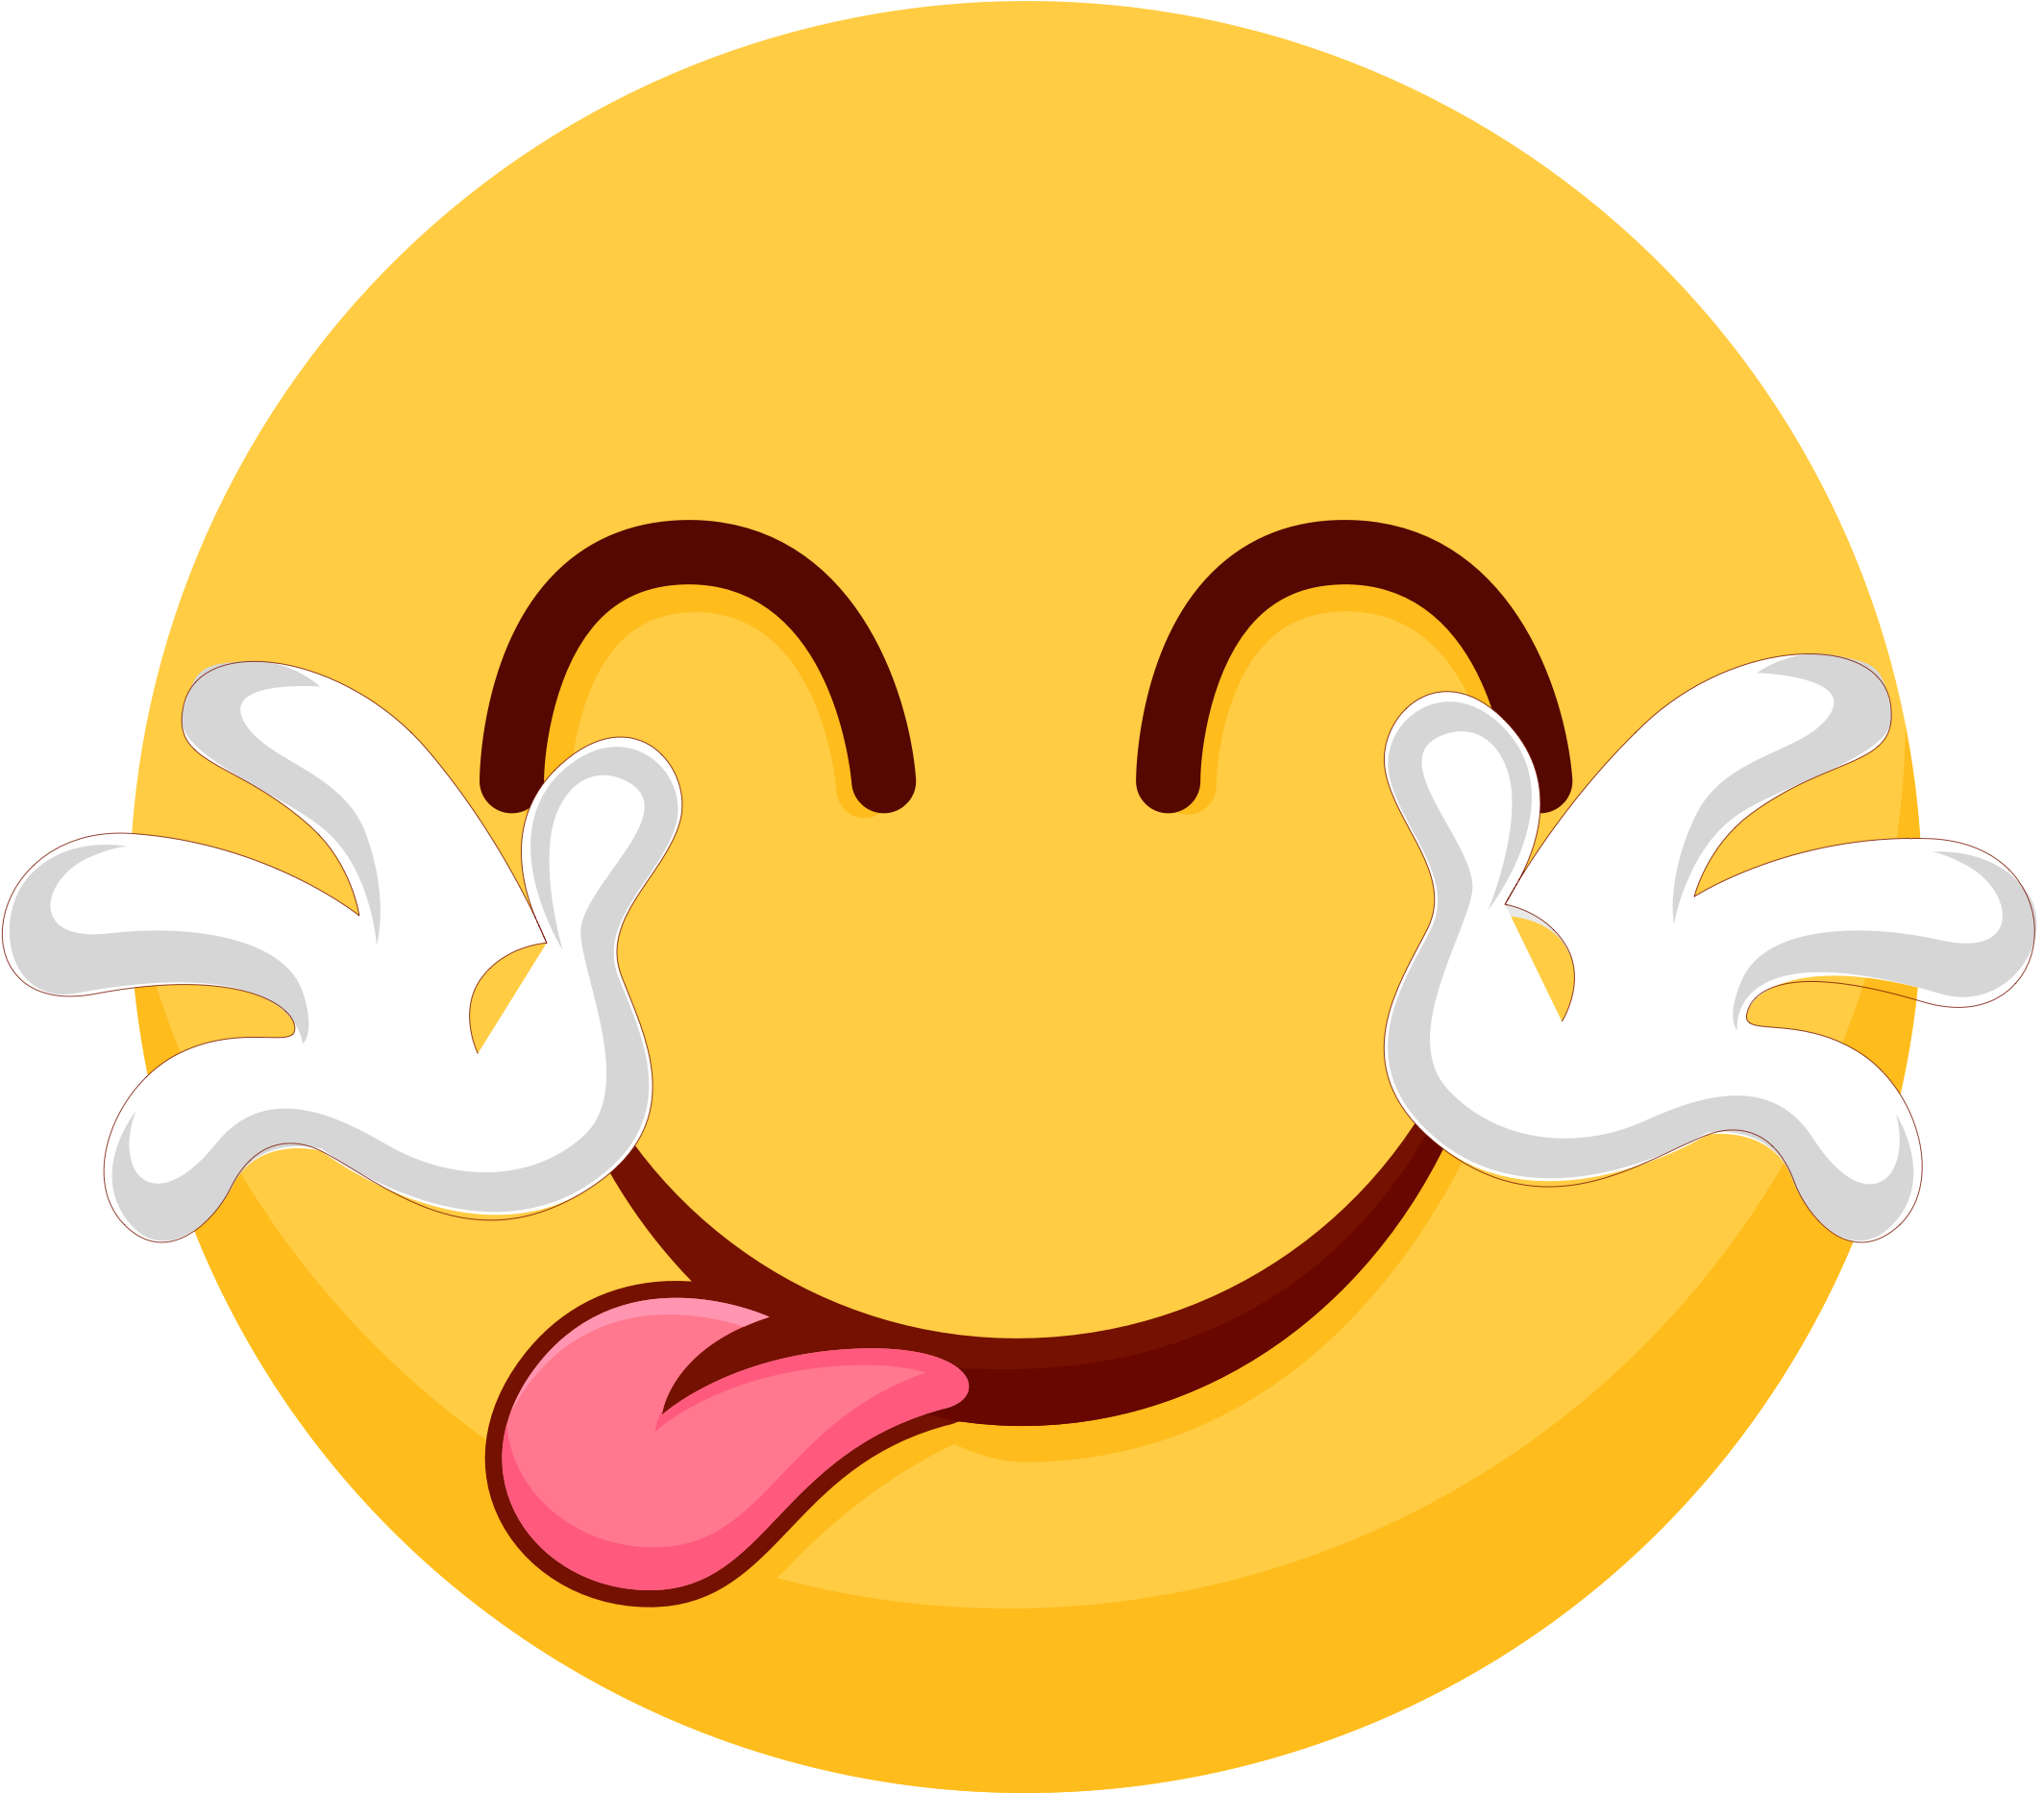 Funny Emoji Are New Emojis For Android Phones That - Emoji (2214x1985)